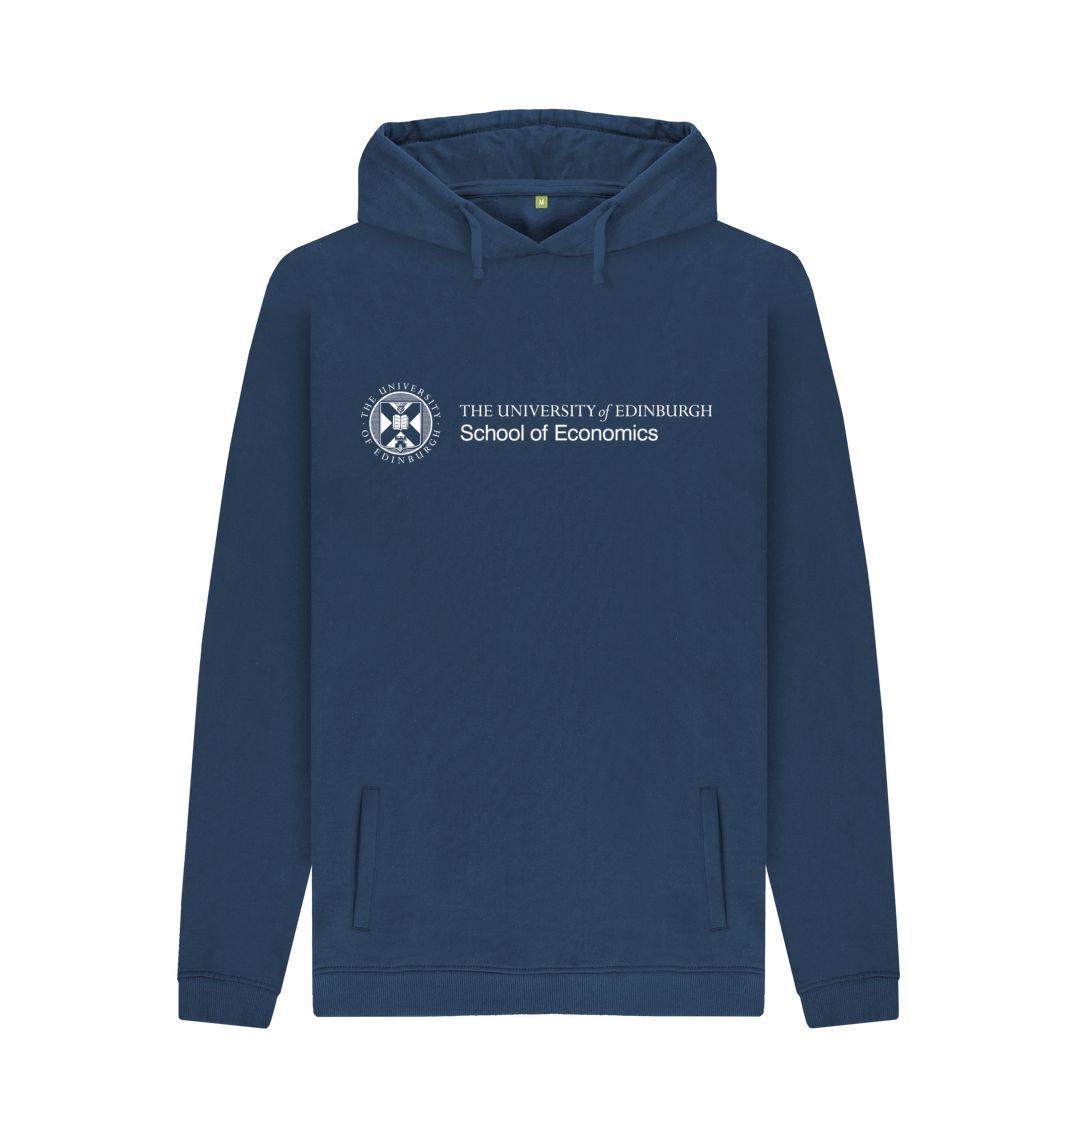 Navy hoodie with white University crest and text that reads ' University of Edinburgh School of Economics